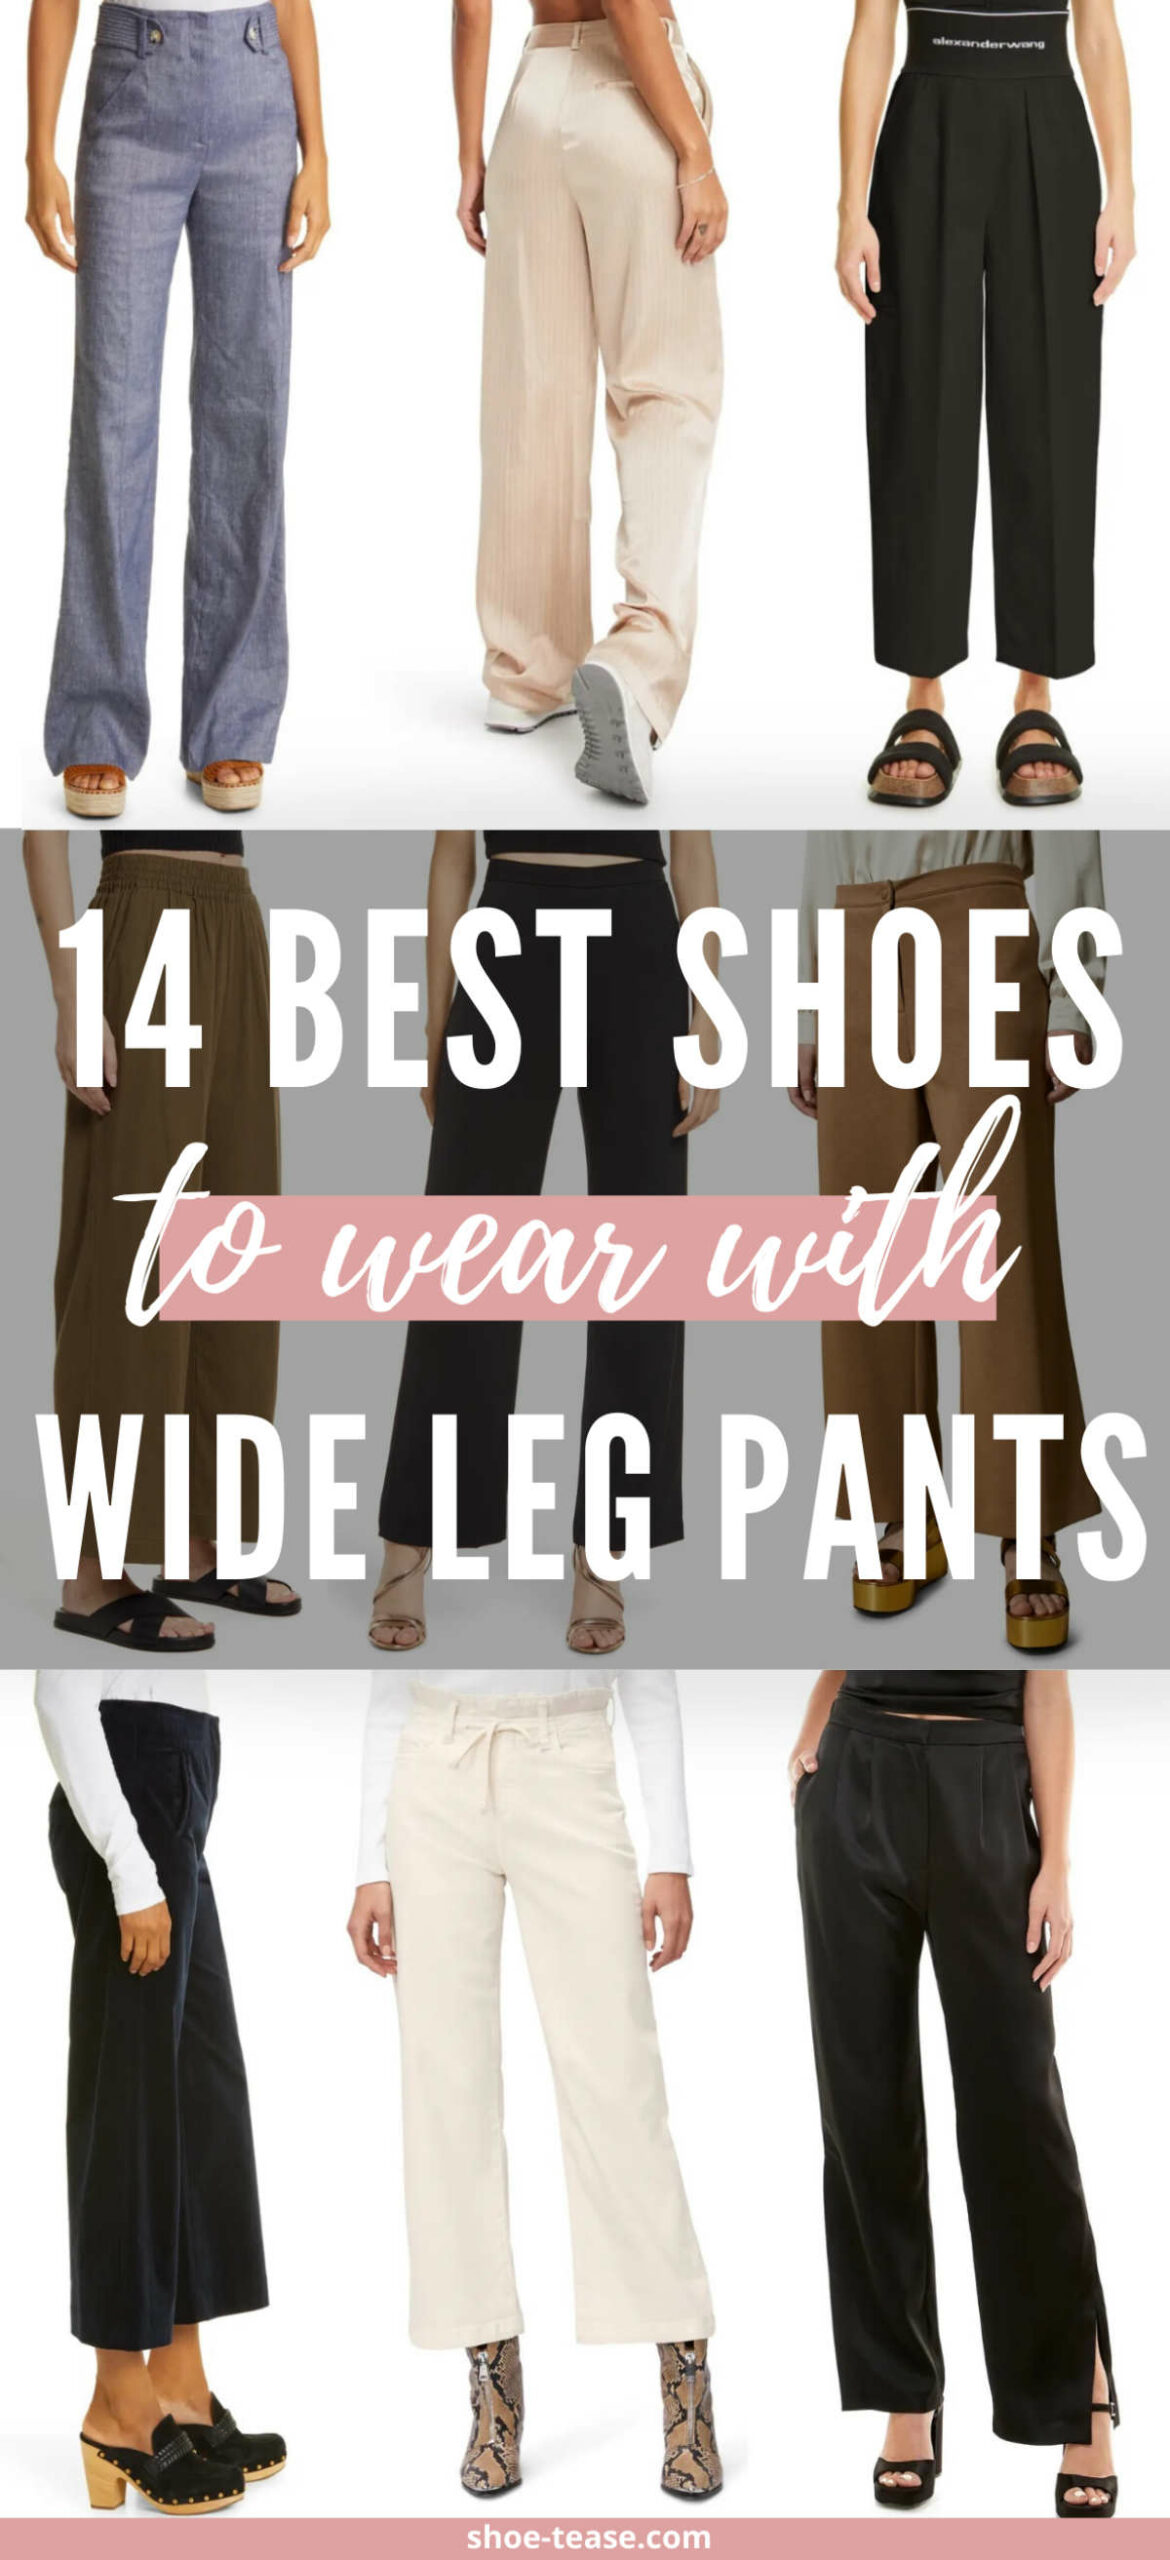 9 women wearing different shoes with wide leg pants under text reading 14 best shoes to wear with wide leg pants.